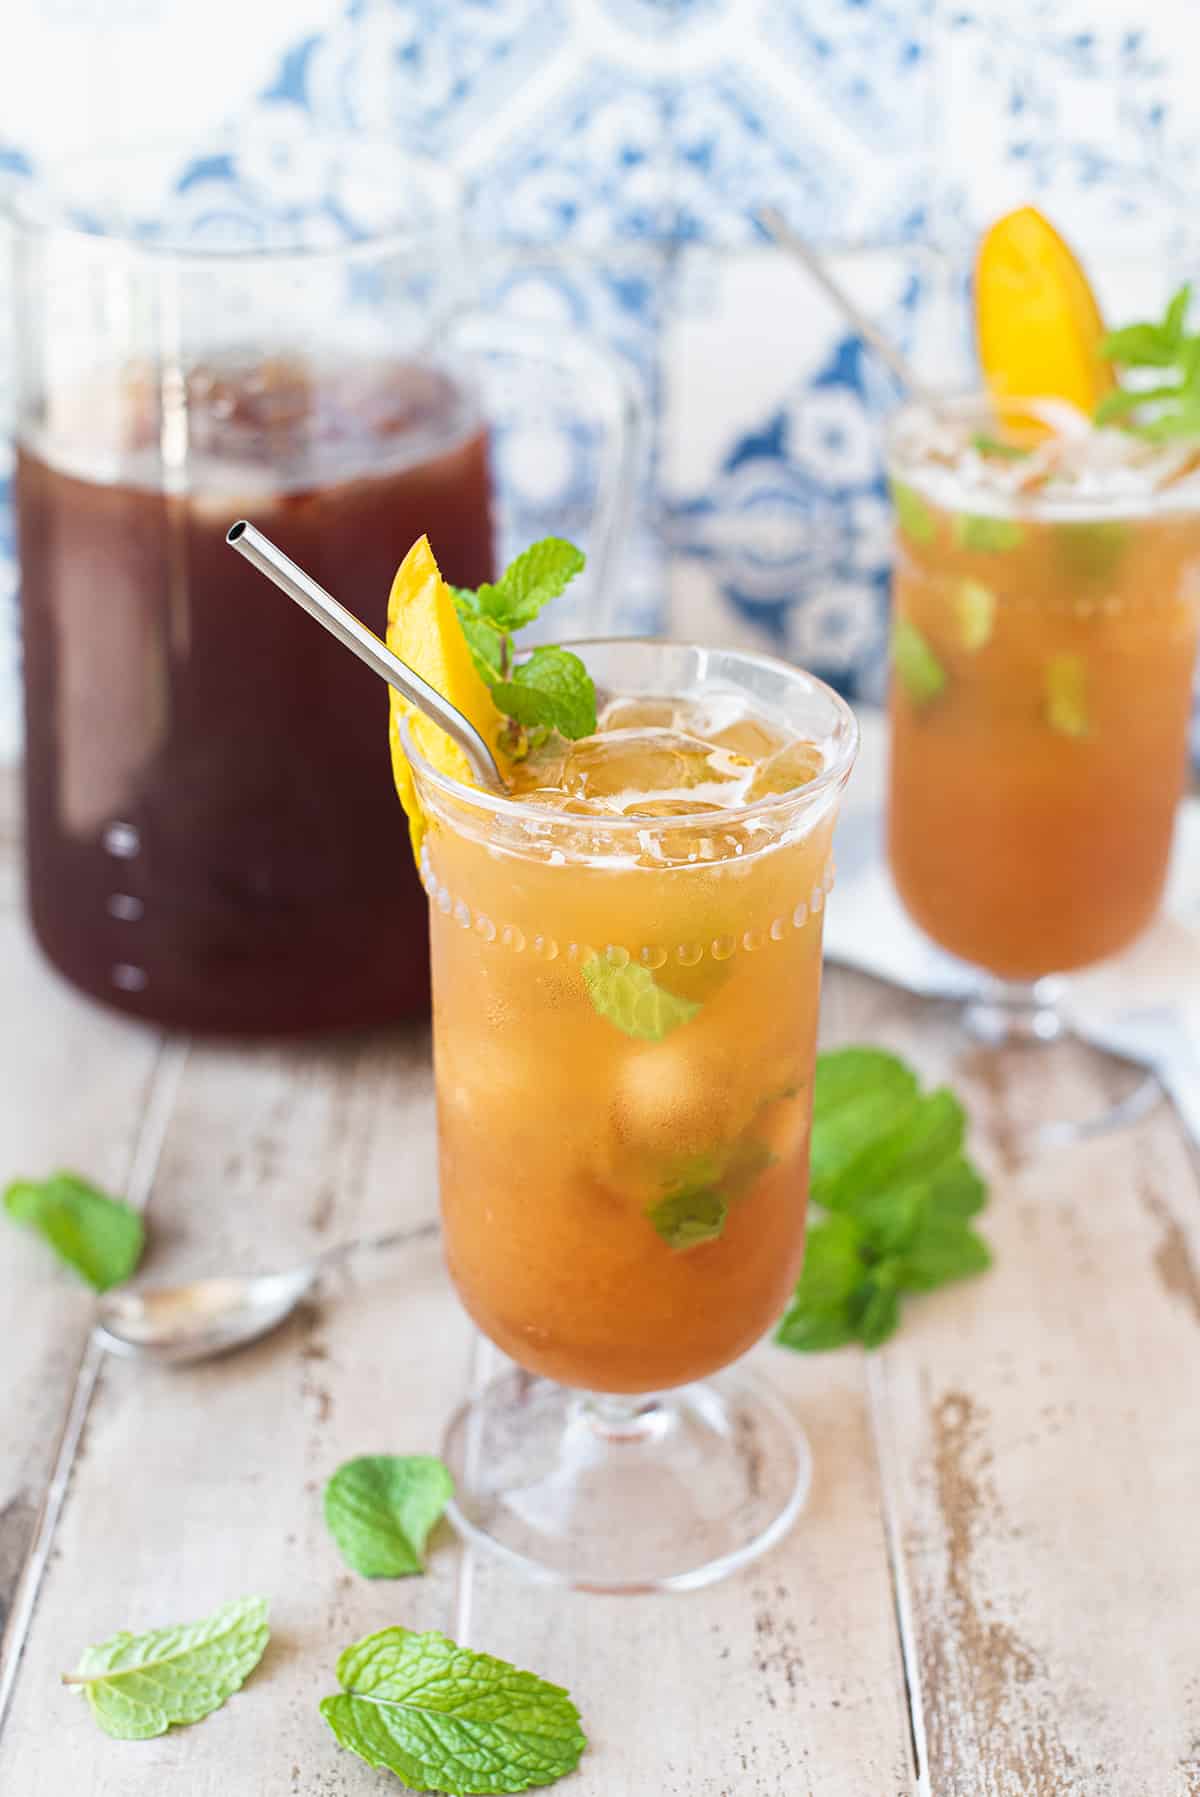 twisted iced tea cocktail with straw, garnished with mint + mango slice